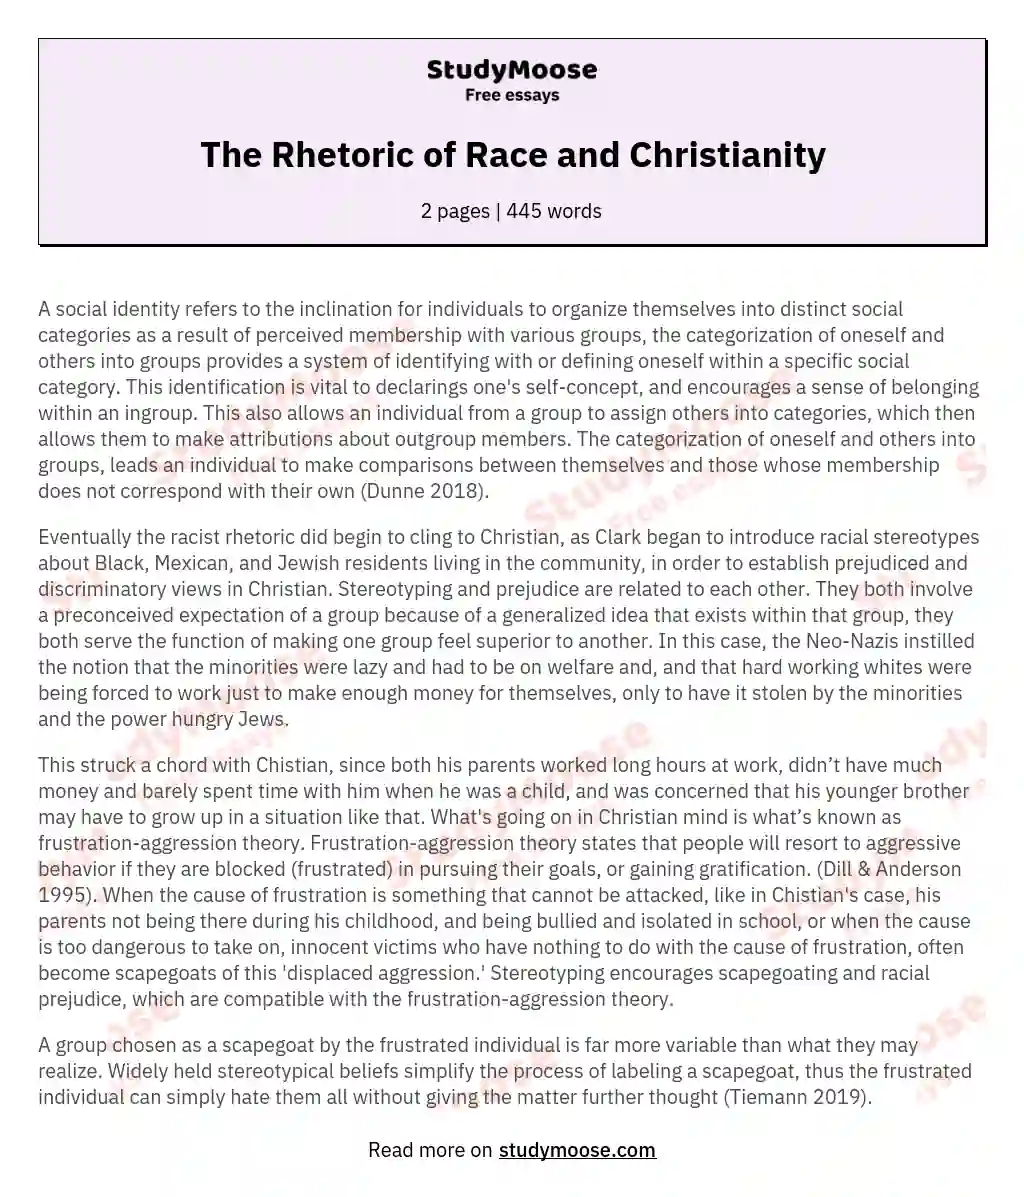 The Rhetoric of Race and Christianity essay